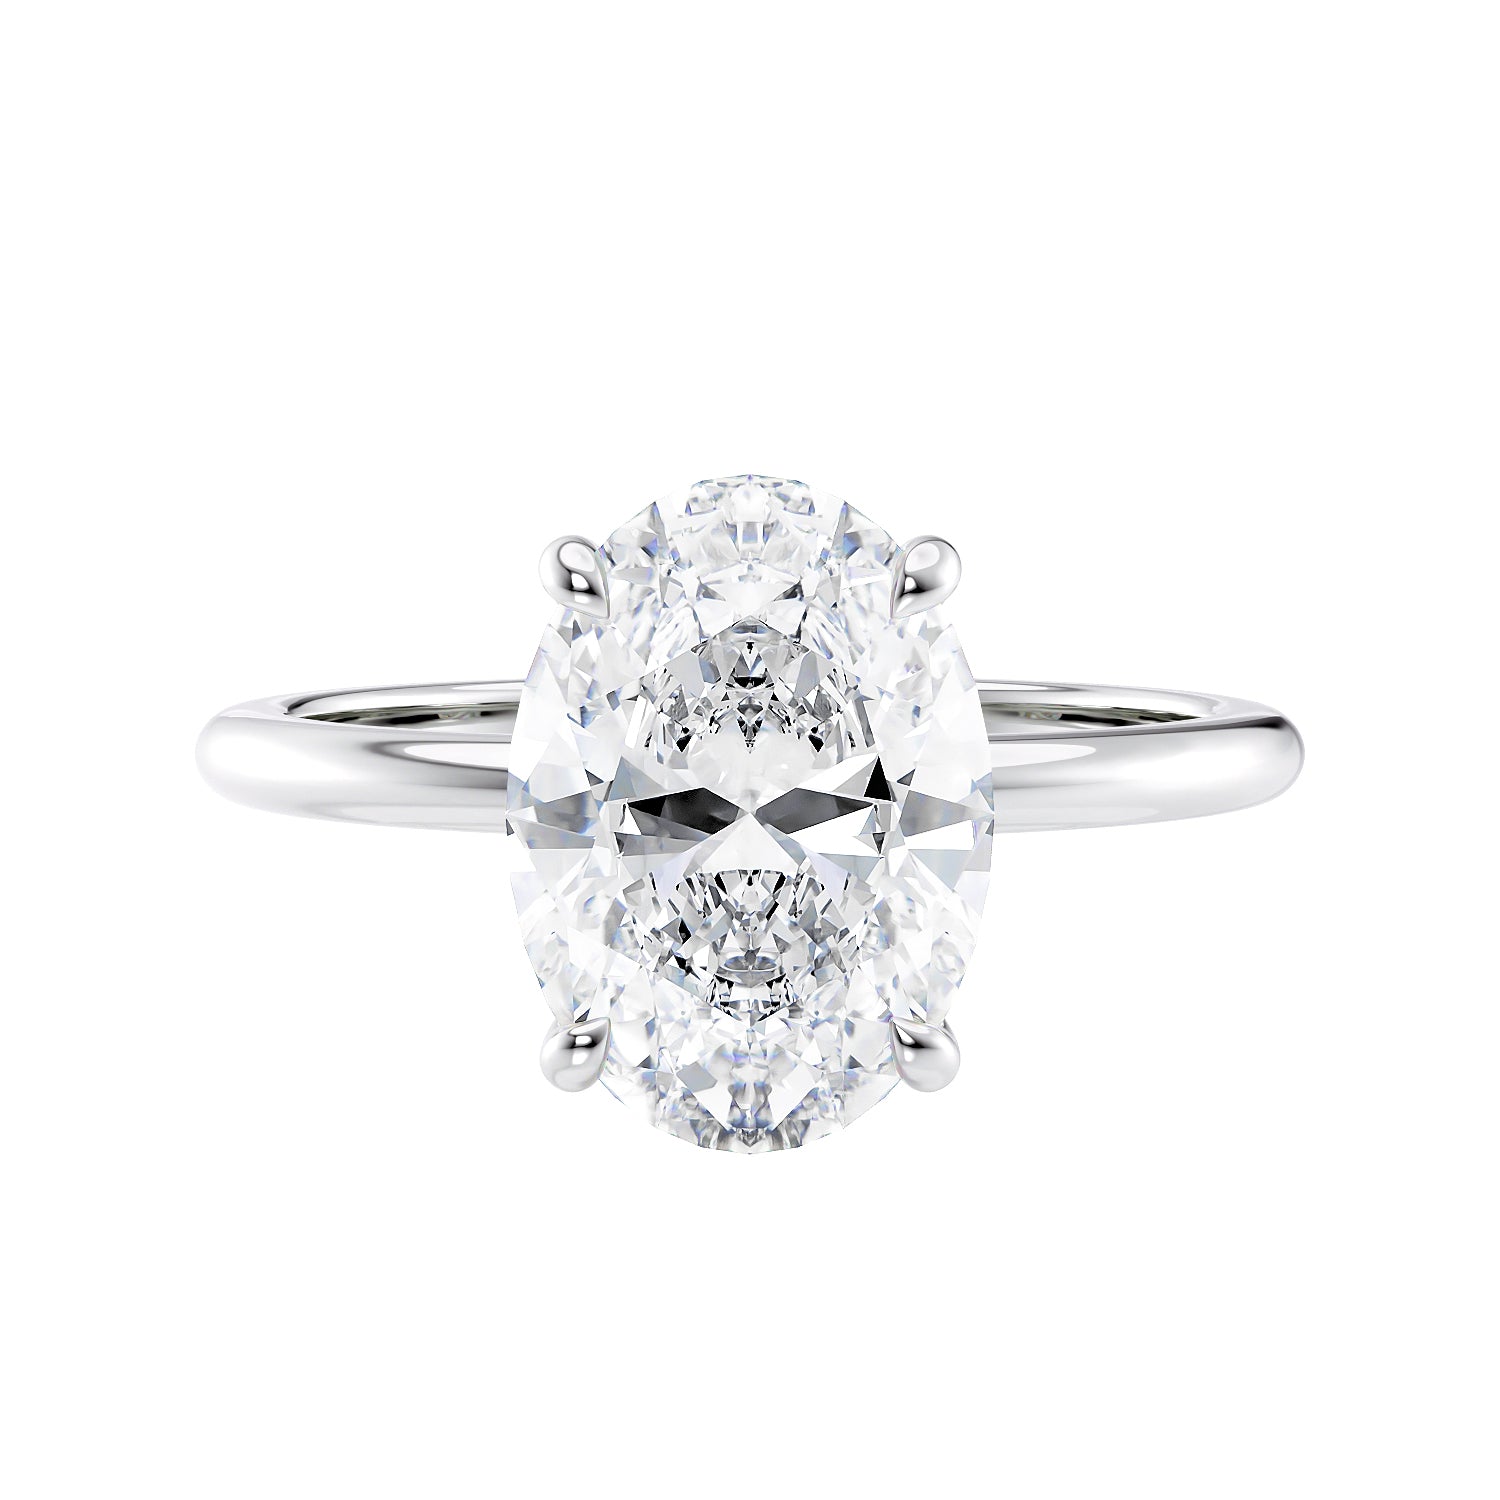 Oval solitaire diamond engagement ring with a hidden halo in white gold front view.